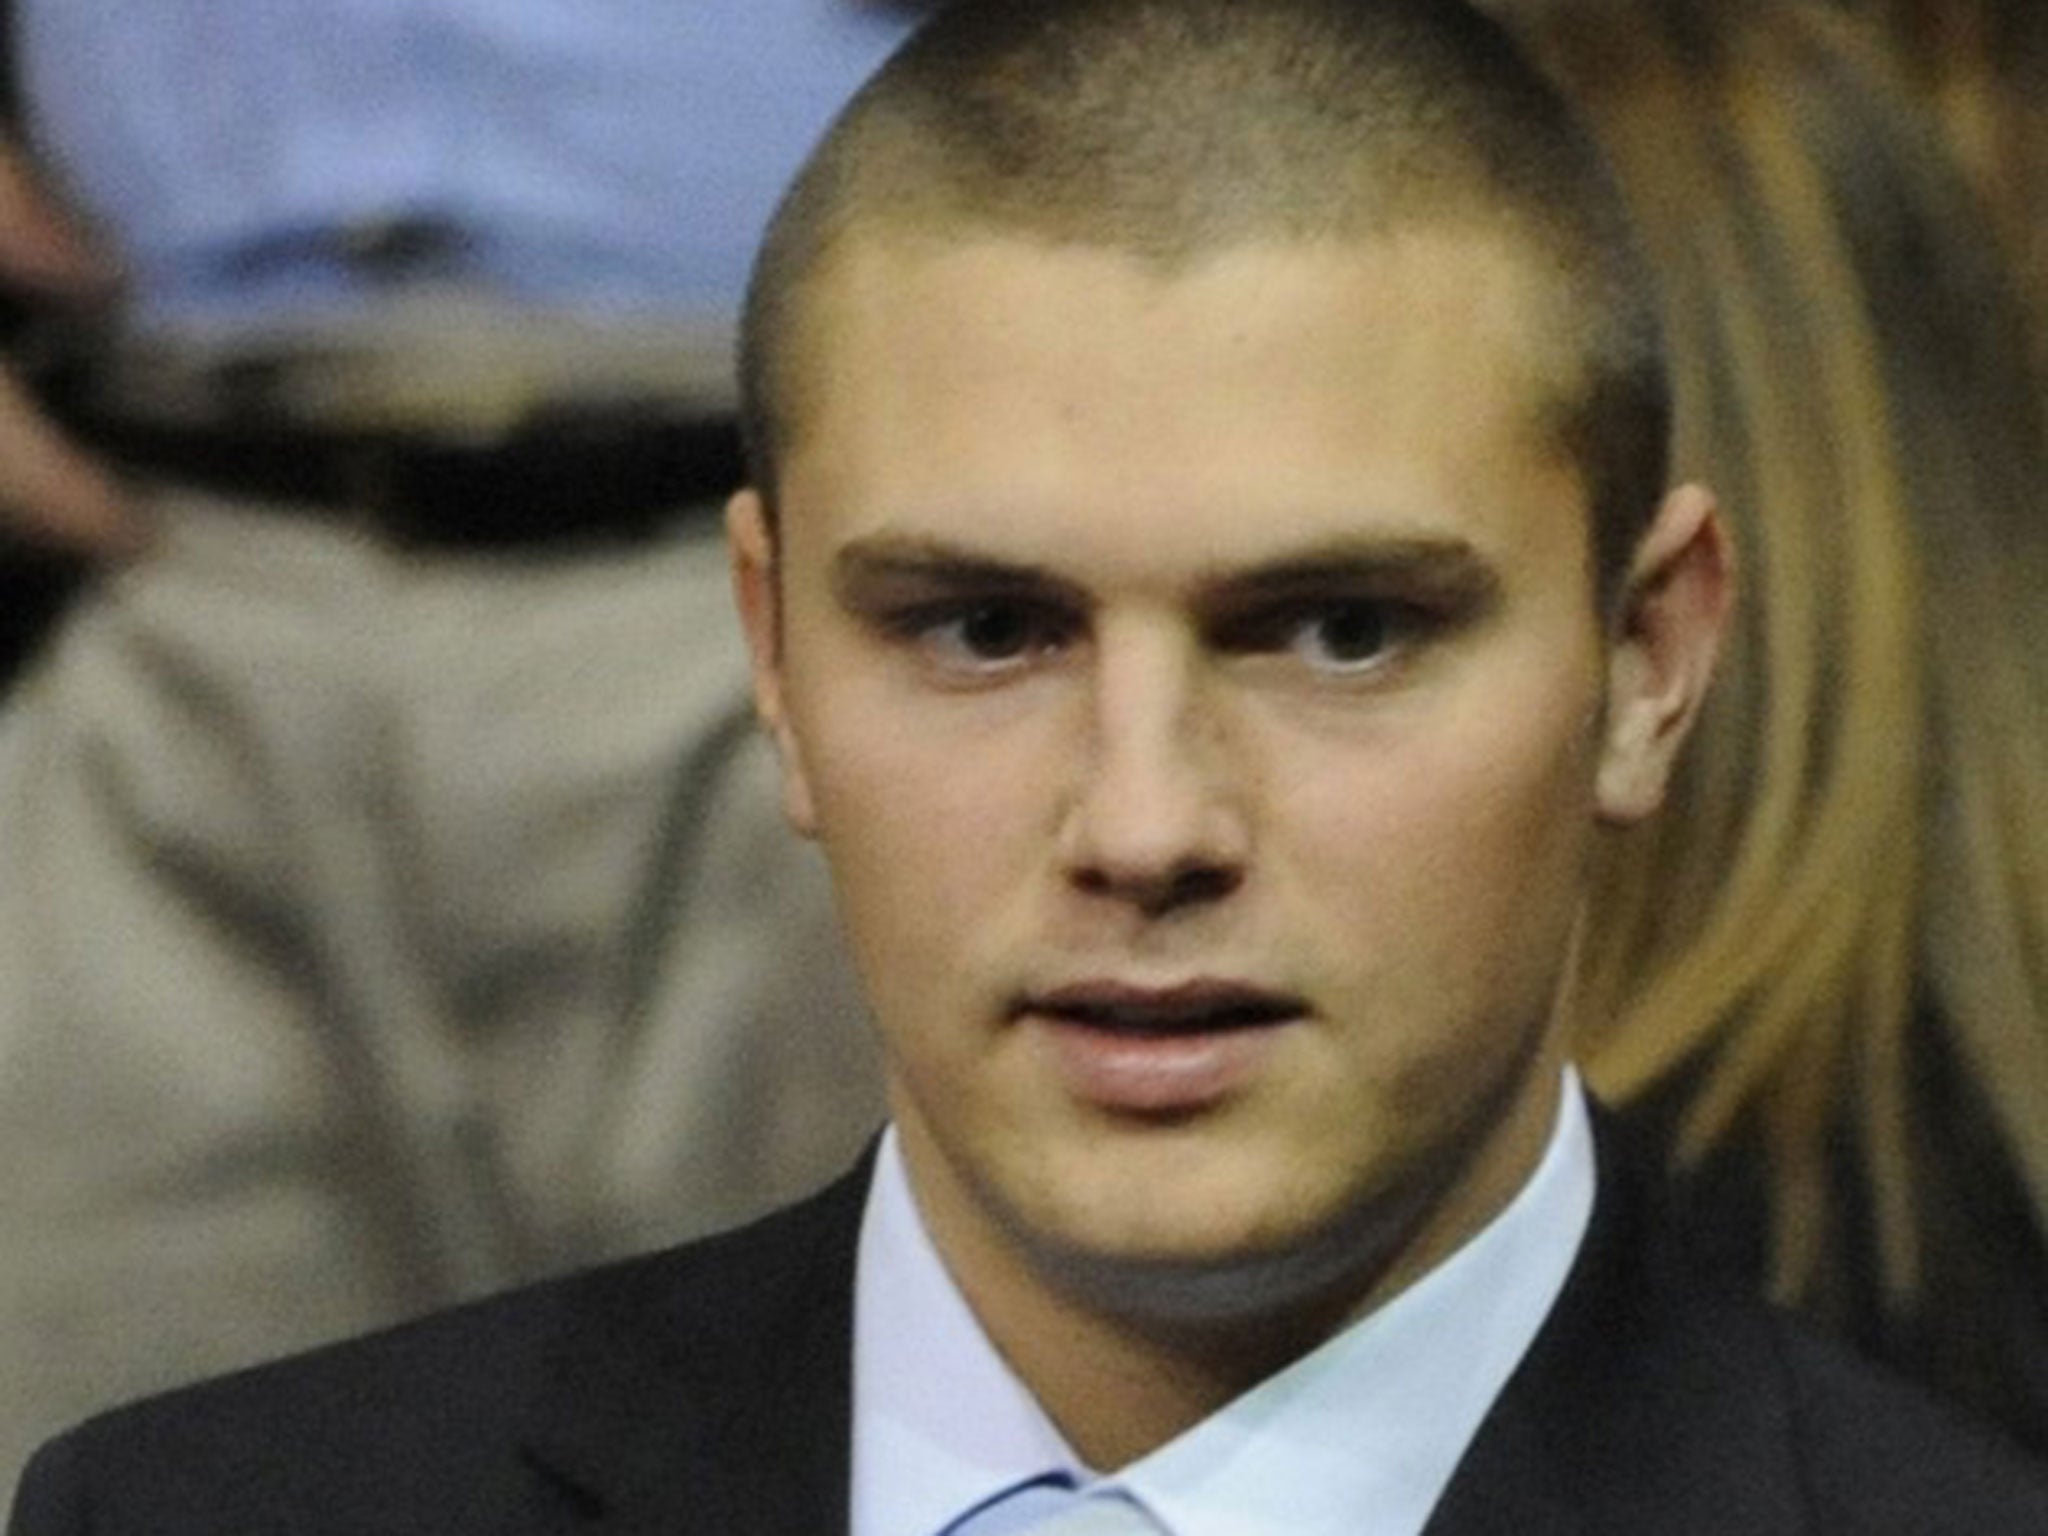 Police say Track Palin 'committed a domestic violence assault on a female, interfered with her ability to report a crime of domestic violence and possessed a firearm while intoxicated'